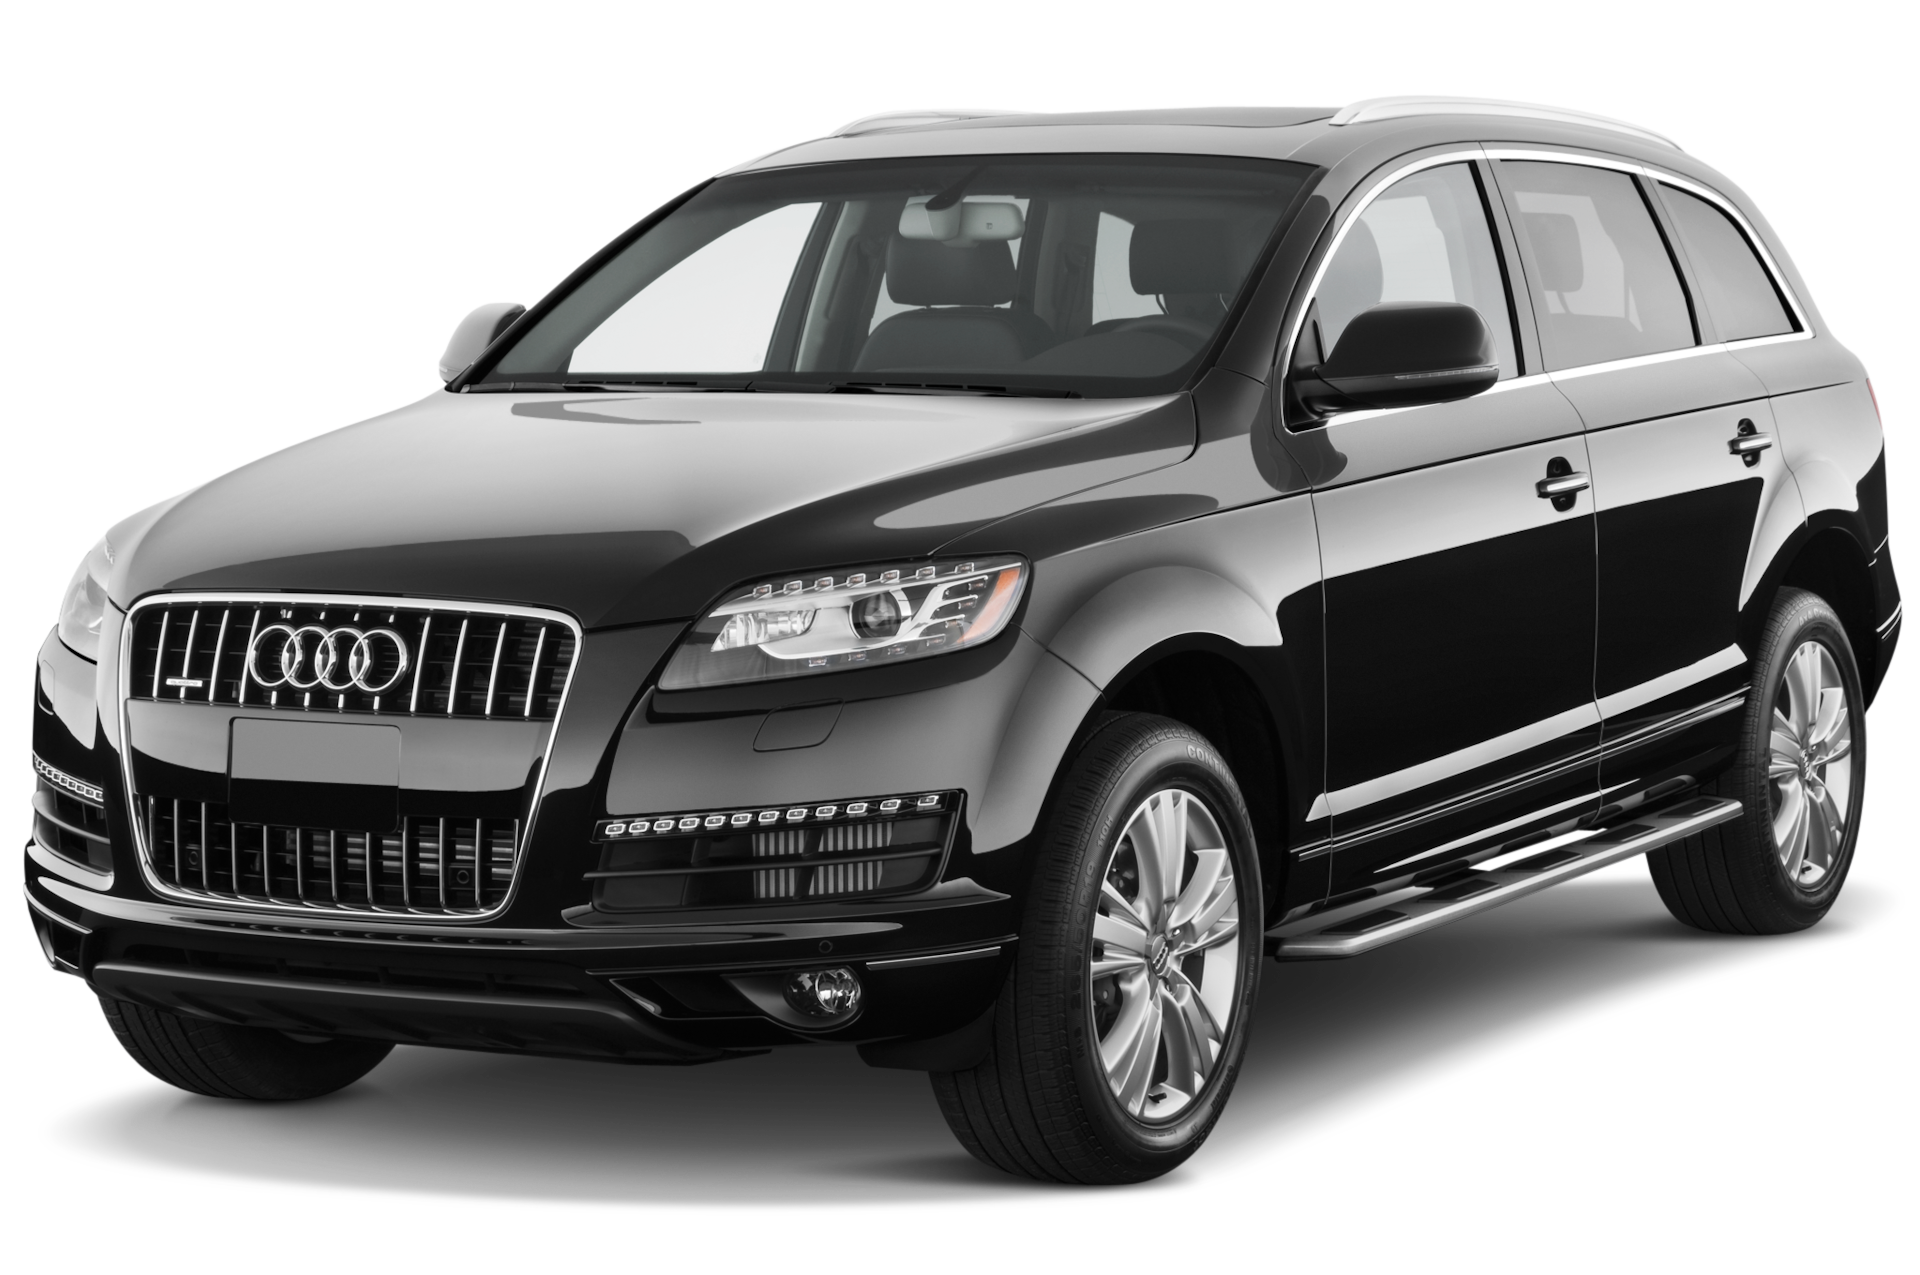 2014 Audi Q7 Prices, Reviews, and Photos - MotorTrend